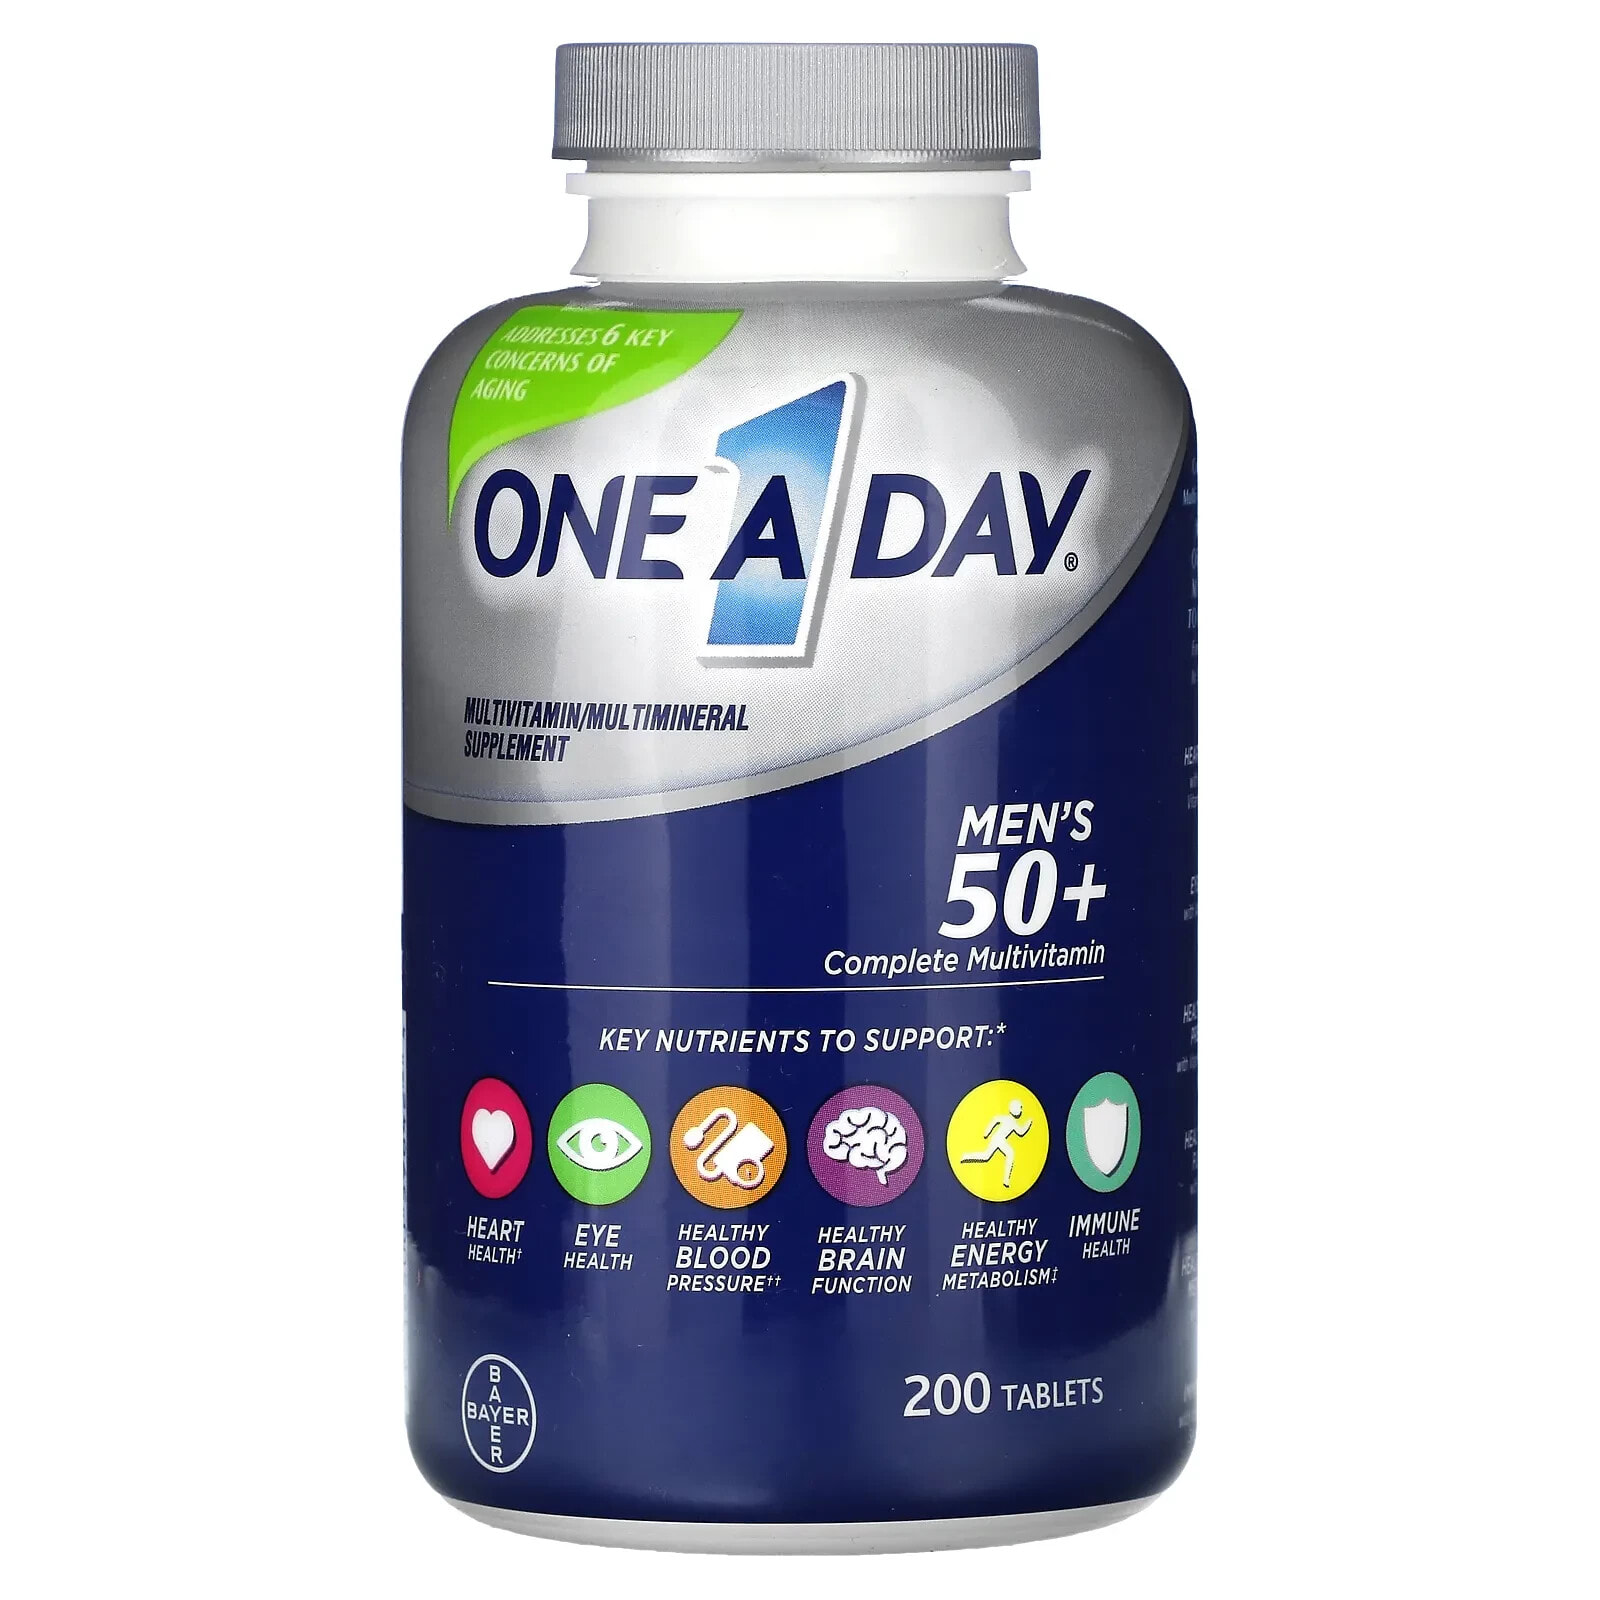 One-A-Day, Men's 50+, Complete Multivitamin, 200 tablets